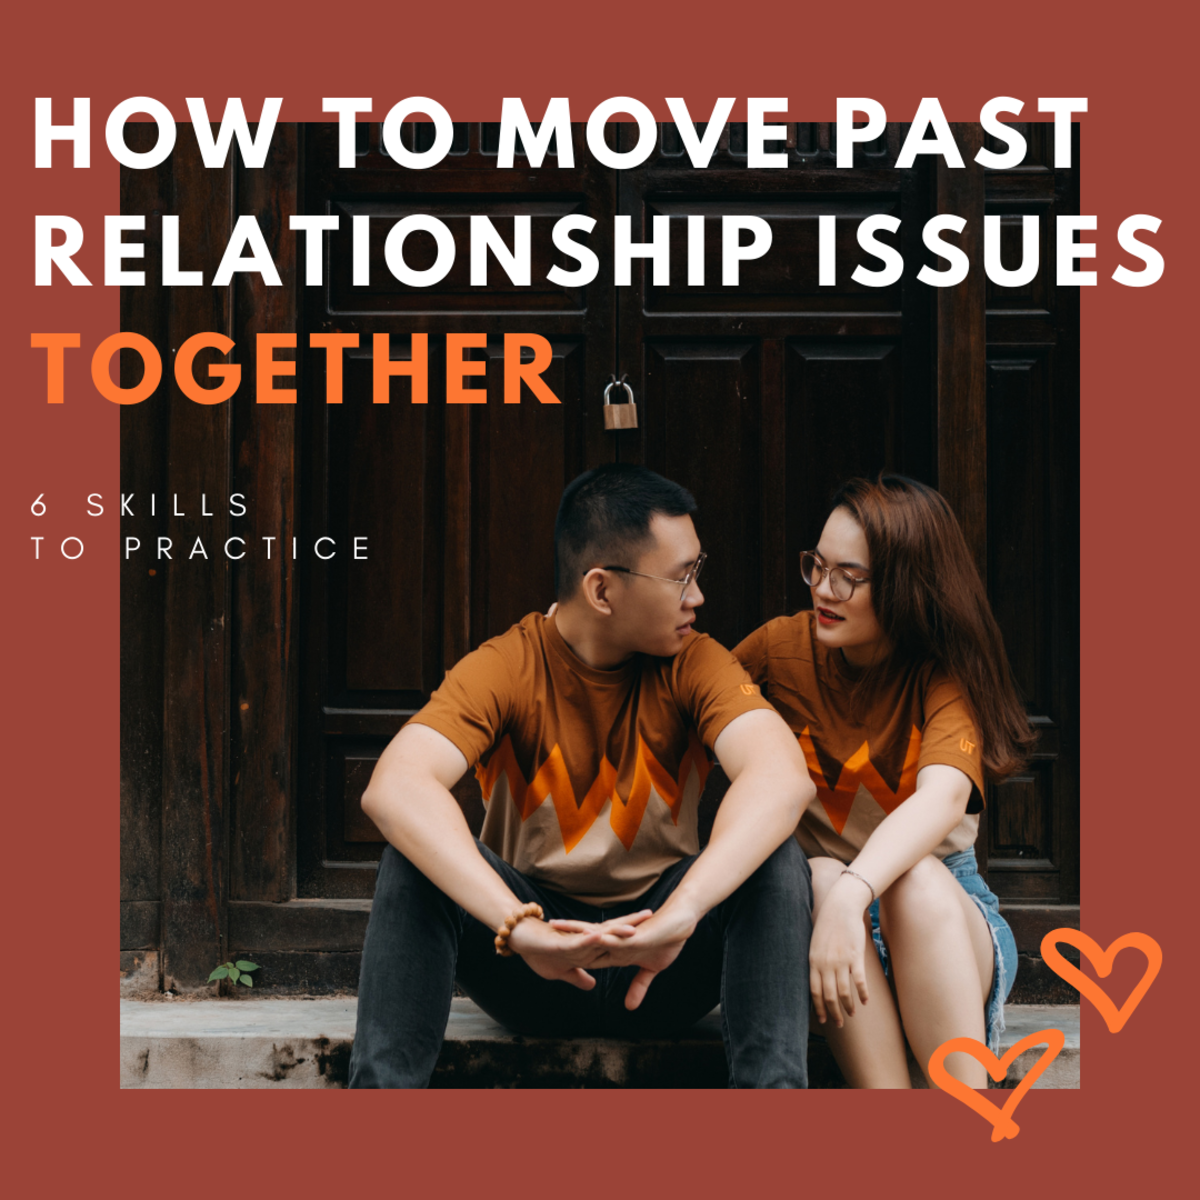 How Do You Get Through Obstacles In Relationships?